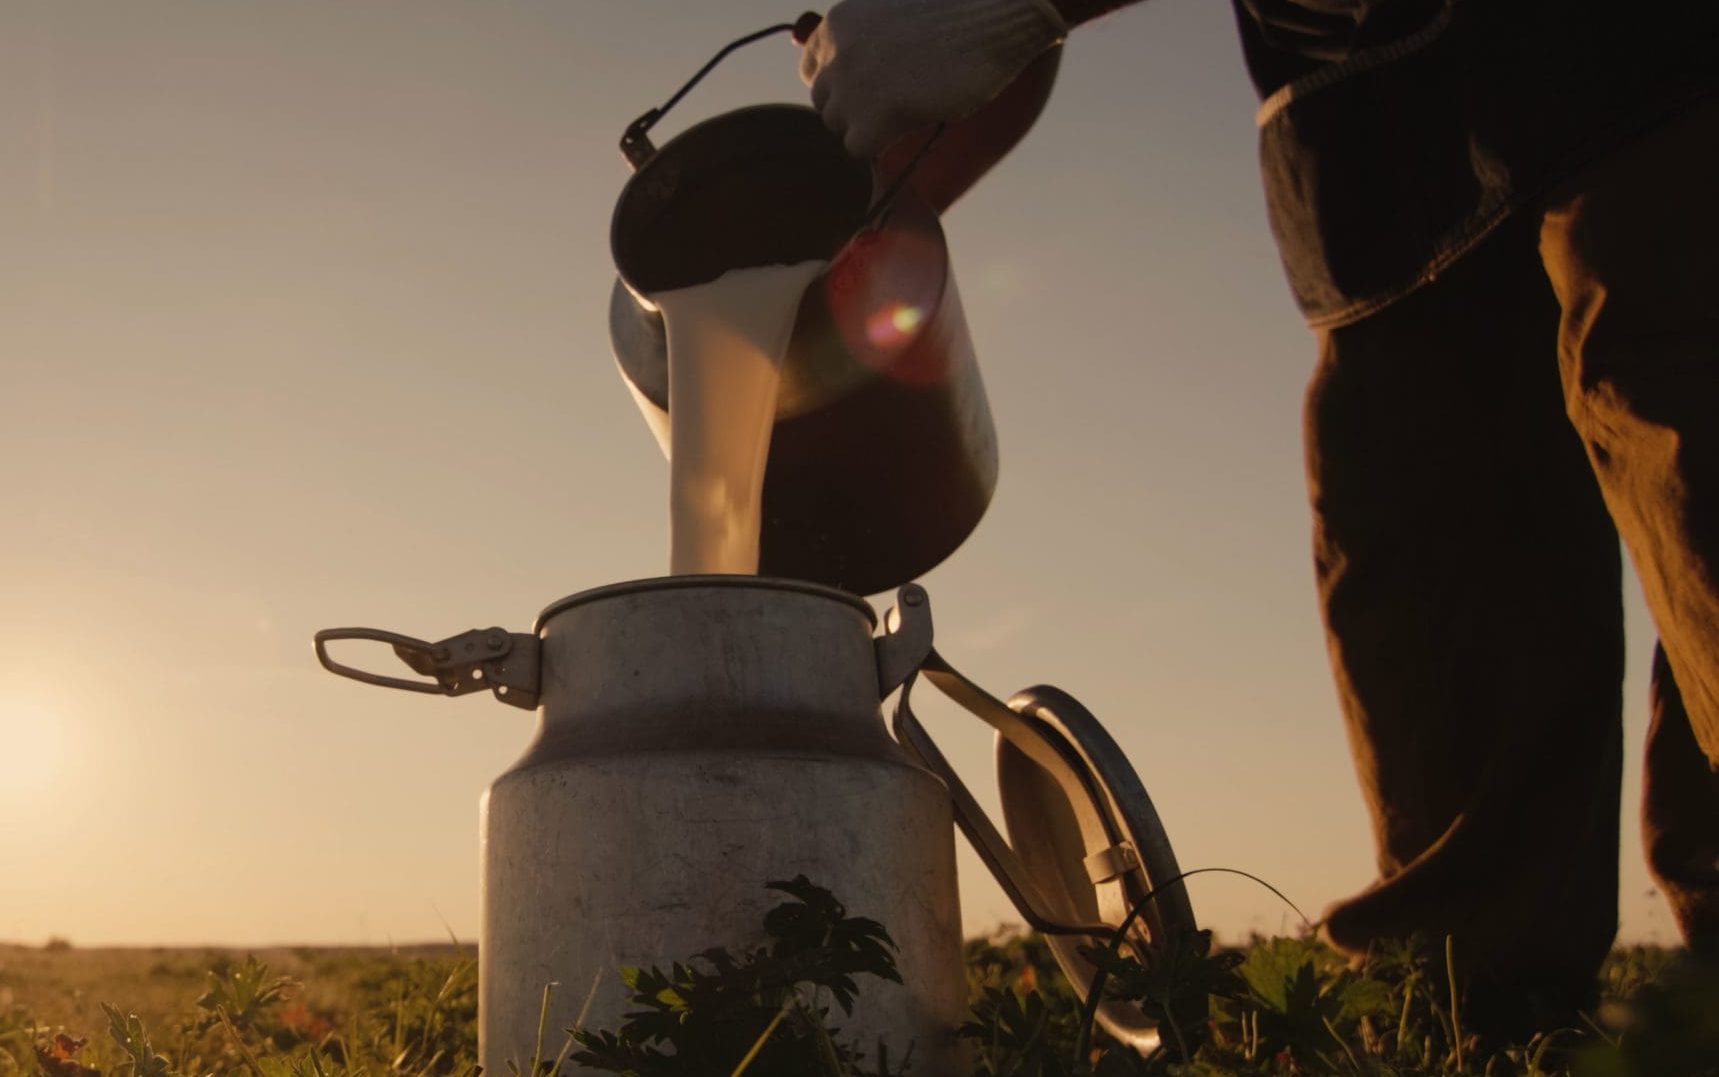 Farmer,pours,milk,into,can,at,sunset,,in,the,background